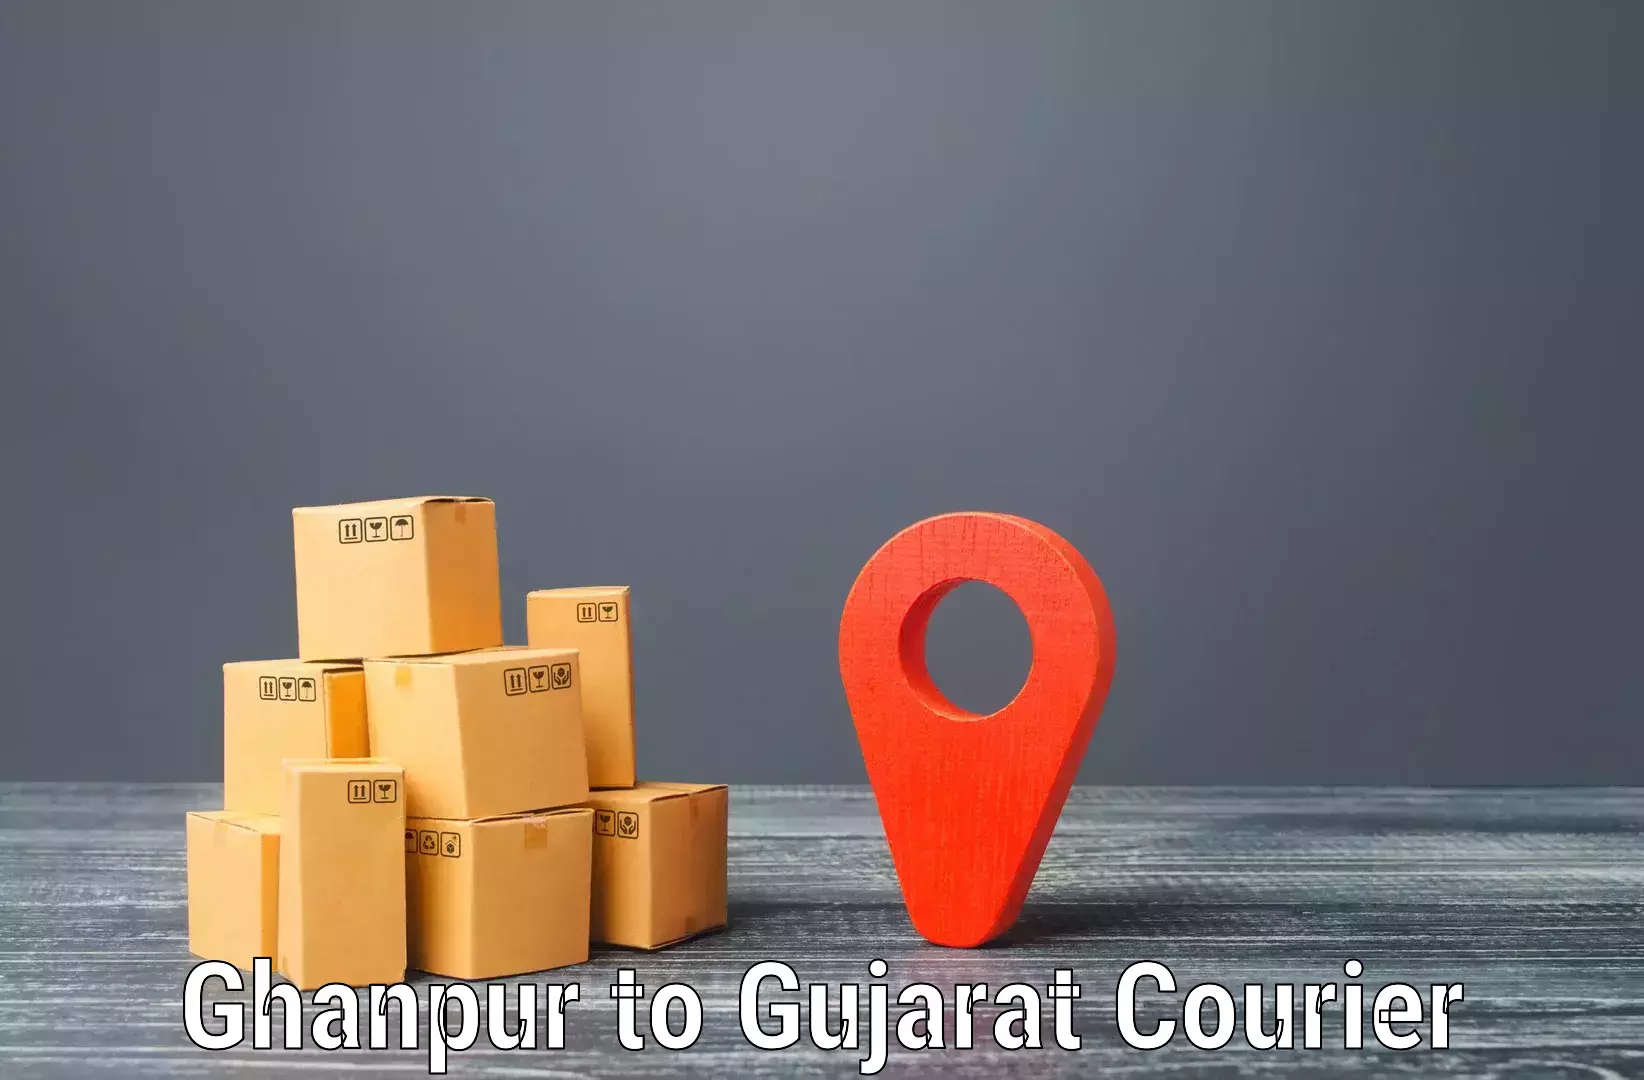 Efficient parcel delivery Ghanpur to Patan Gujarat